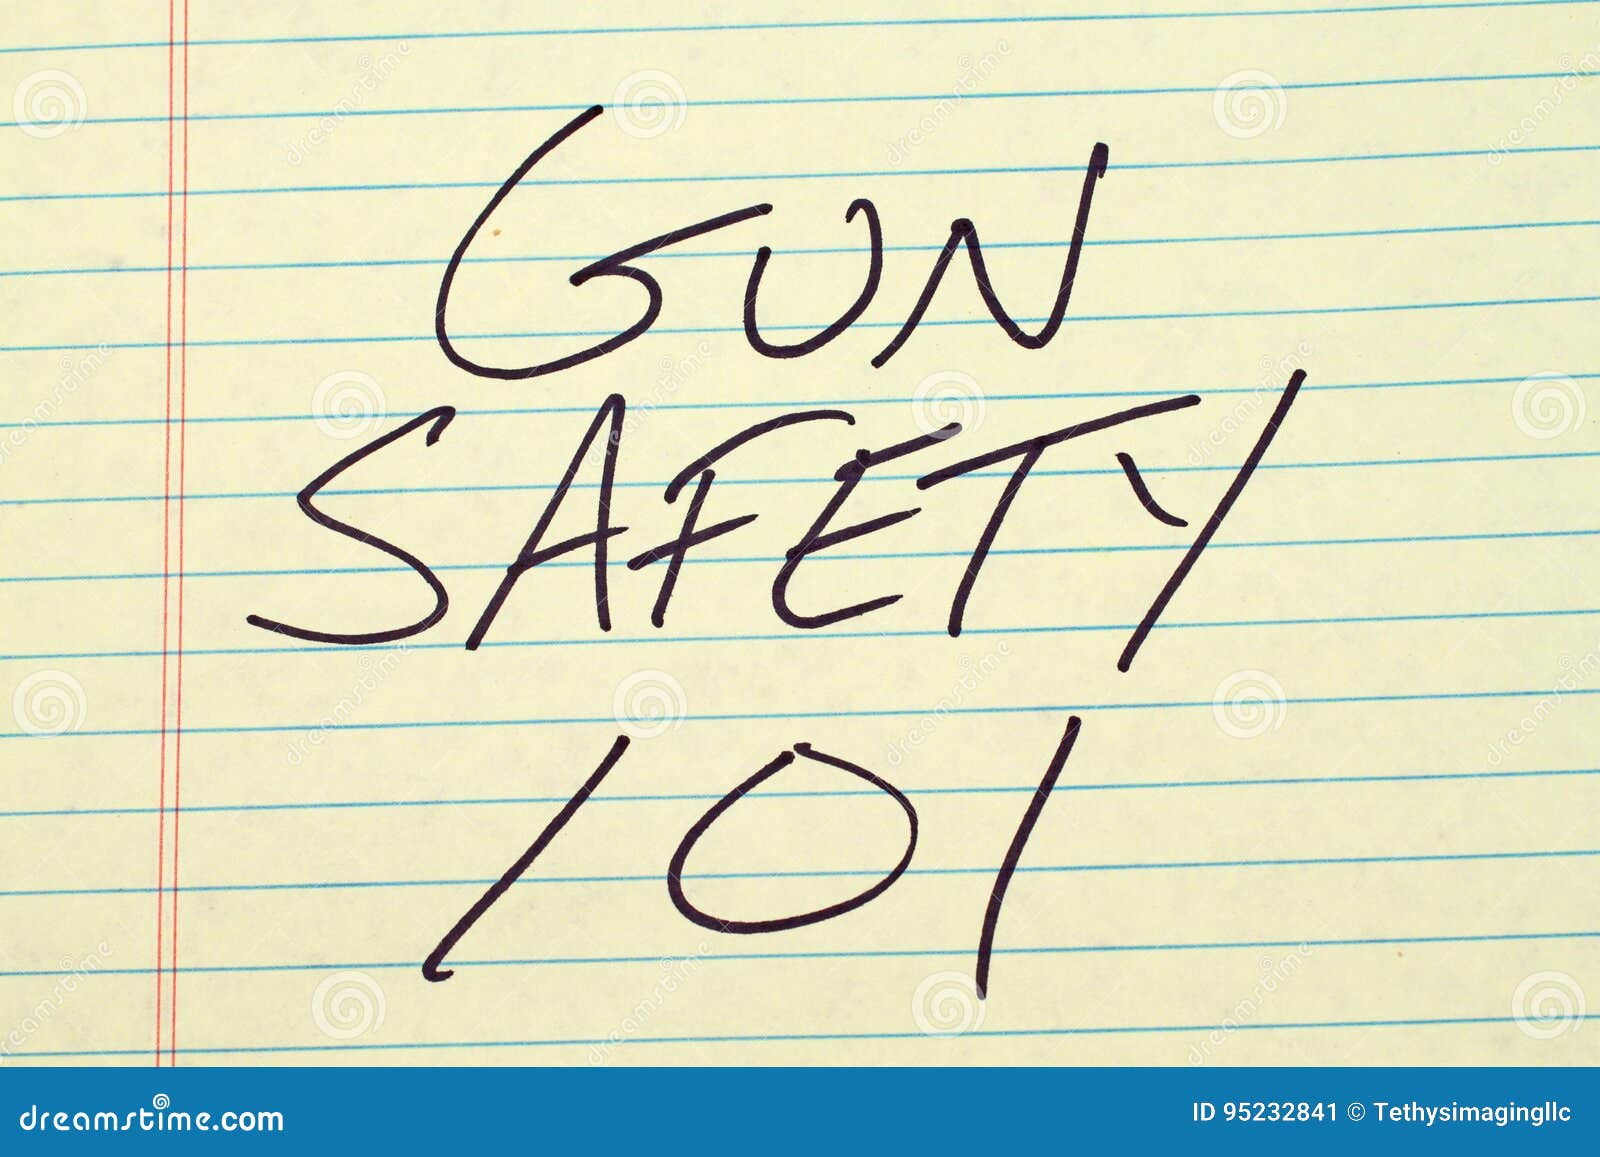 gun safety 101 on a yellow legal pad